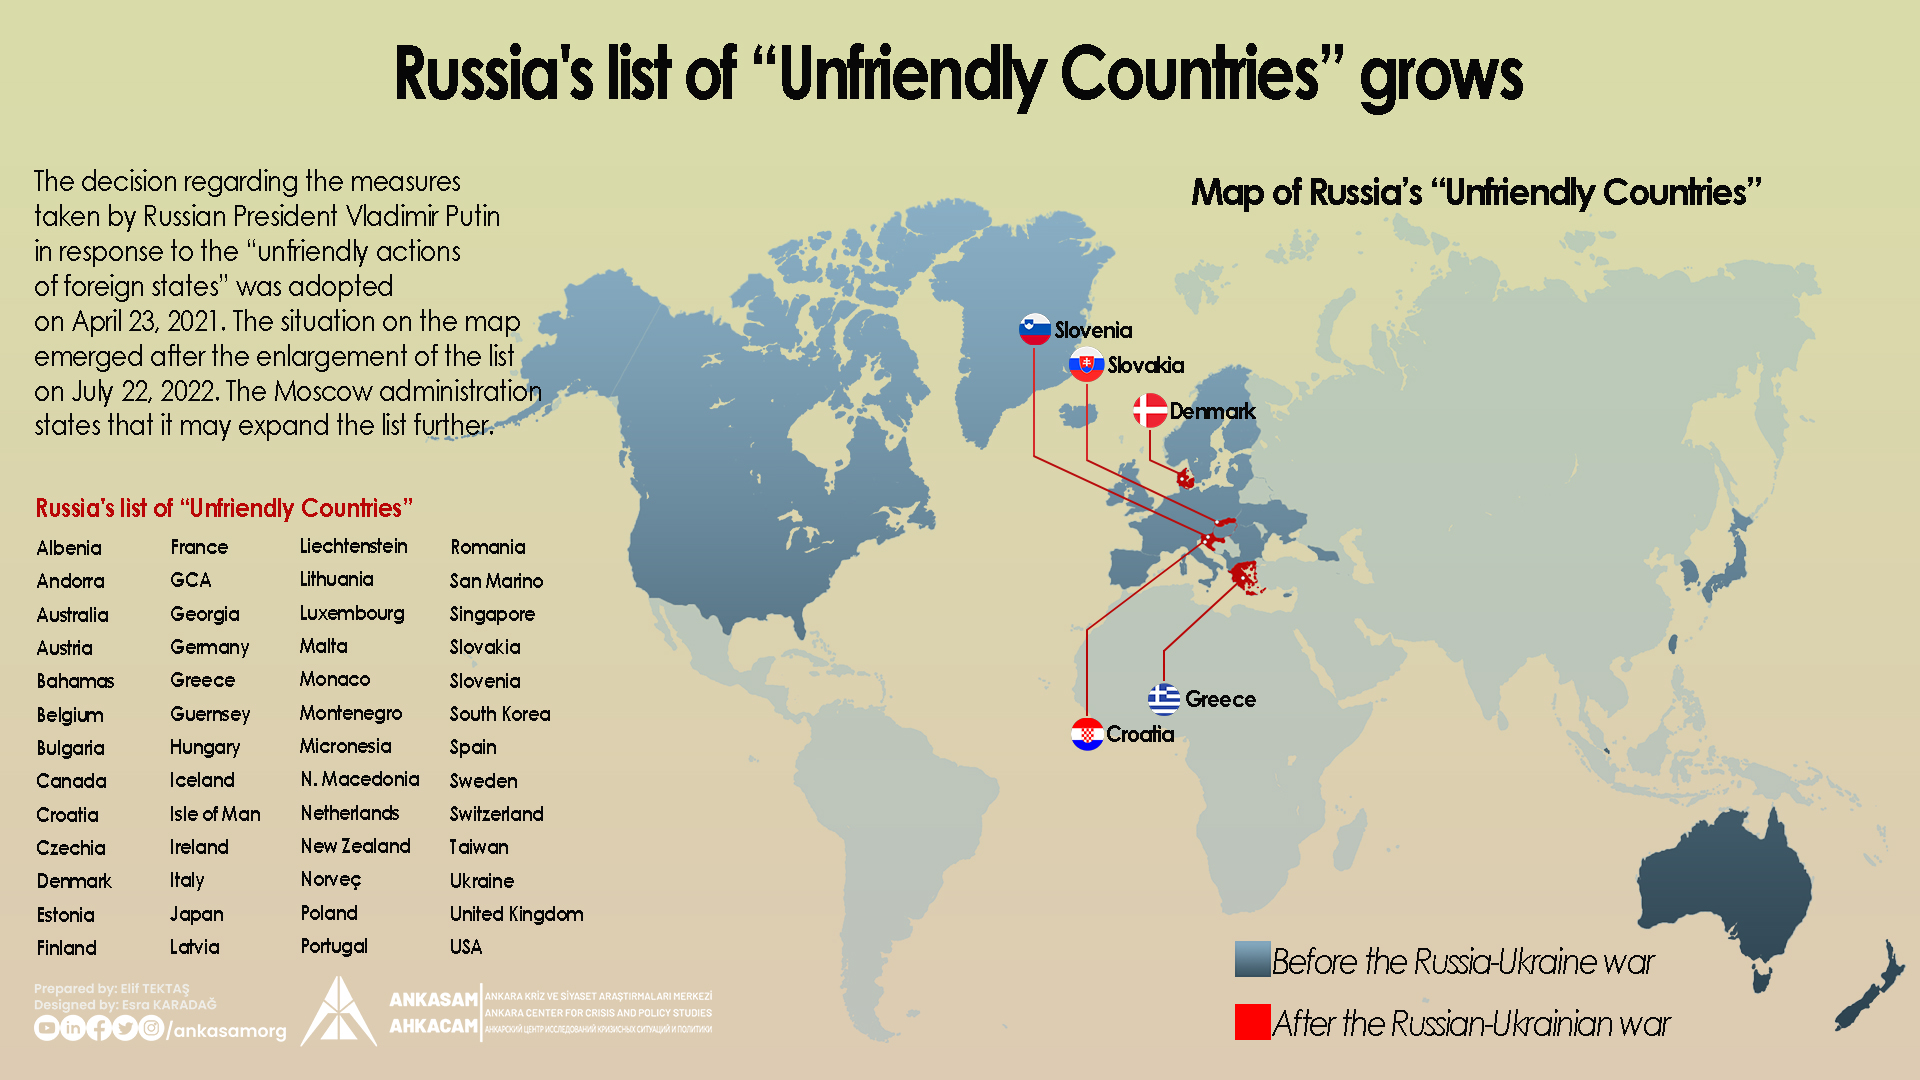 ANKASAM Infographic Russia's list of “Unfriendly Countries” grows